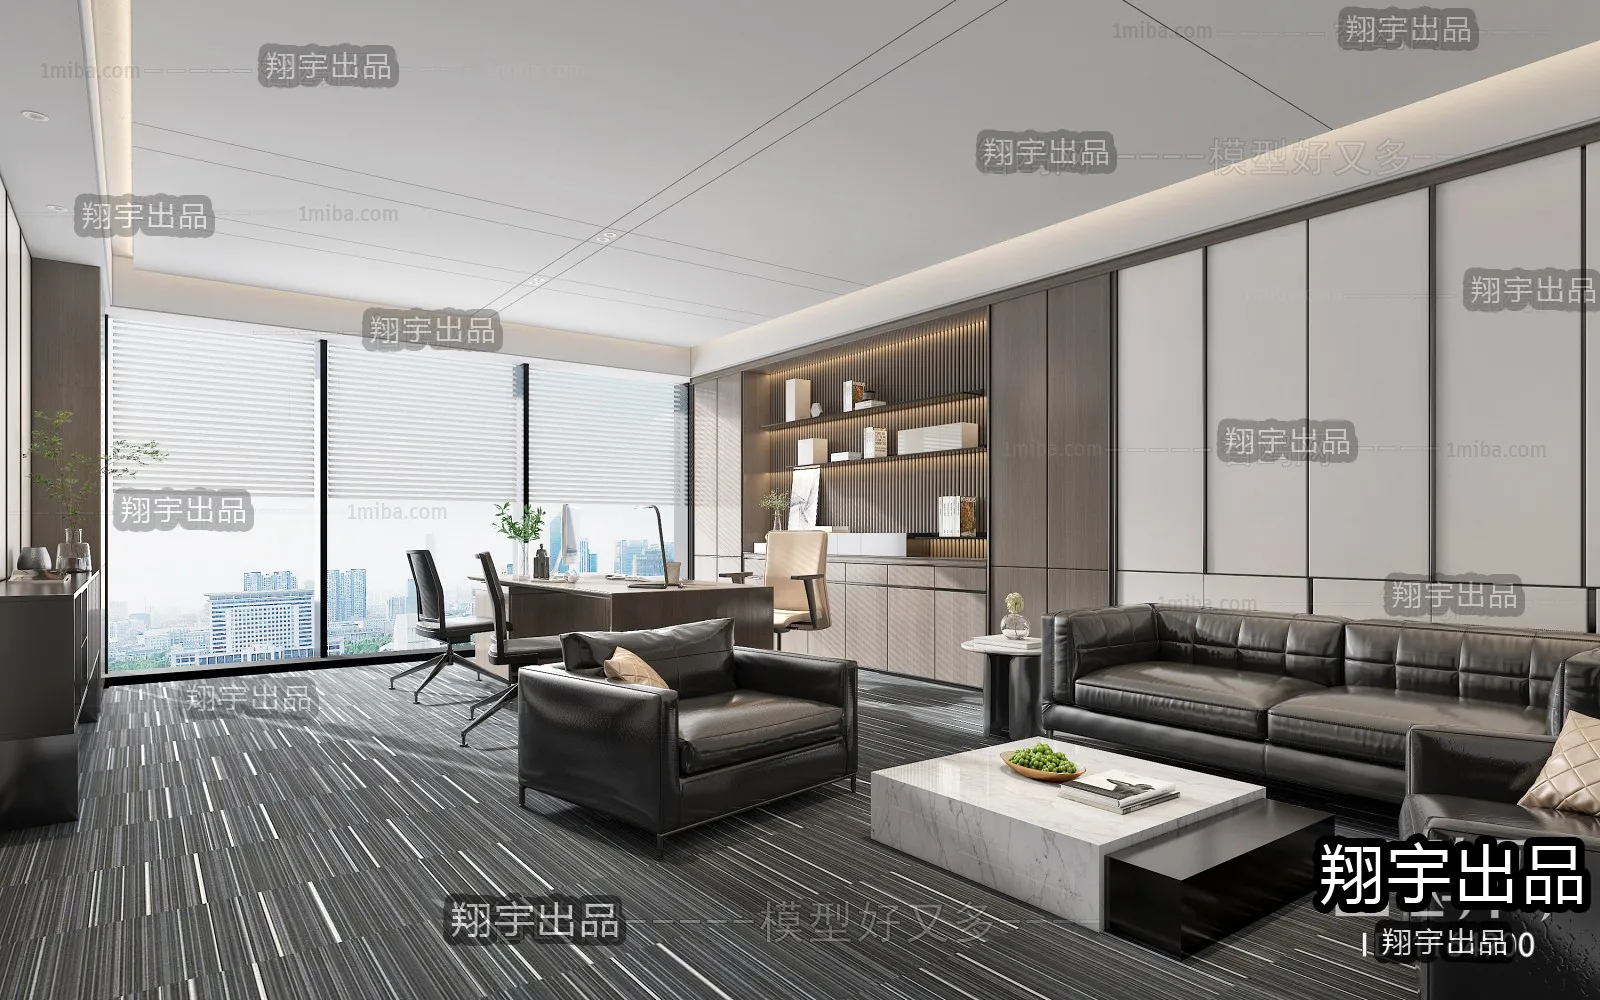 3D OFFICE INTERIOR (VRAY) – MANAGER ROOM 3D SCENES – 107